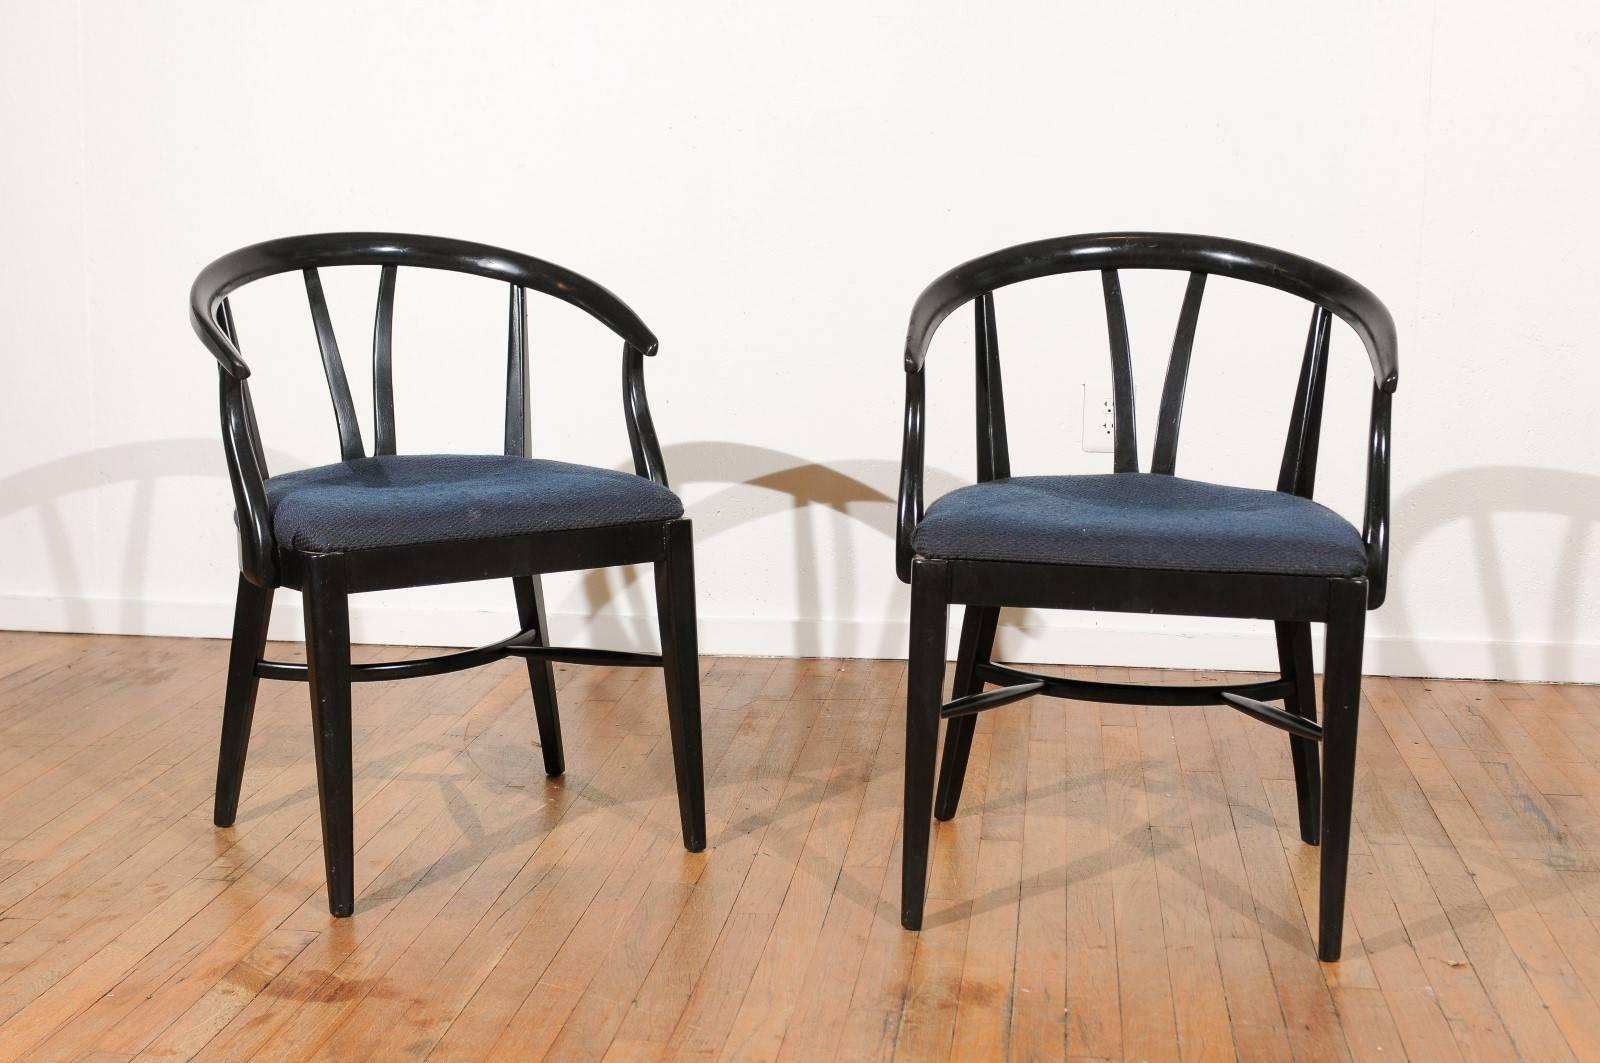 Mid-20th century set of six black lacquer, wishbone style, barrel back dining chairs with upholstered seats.